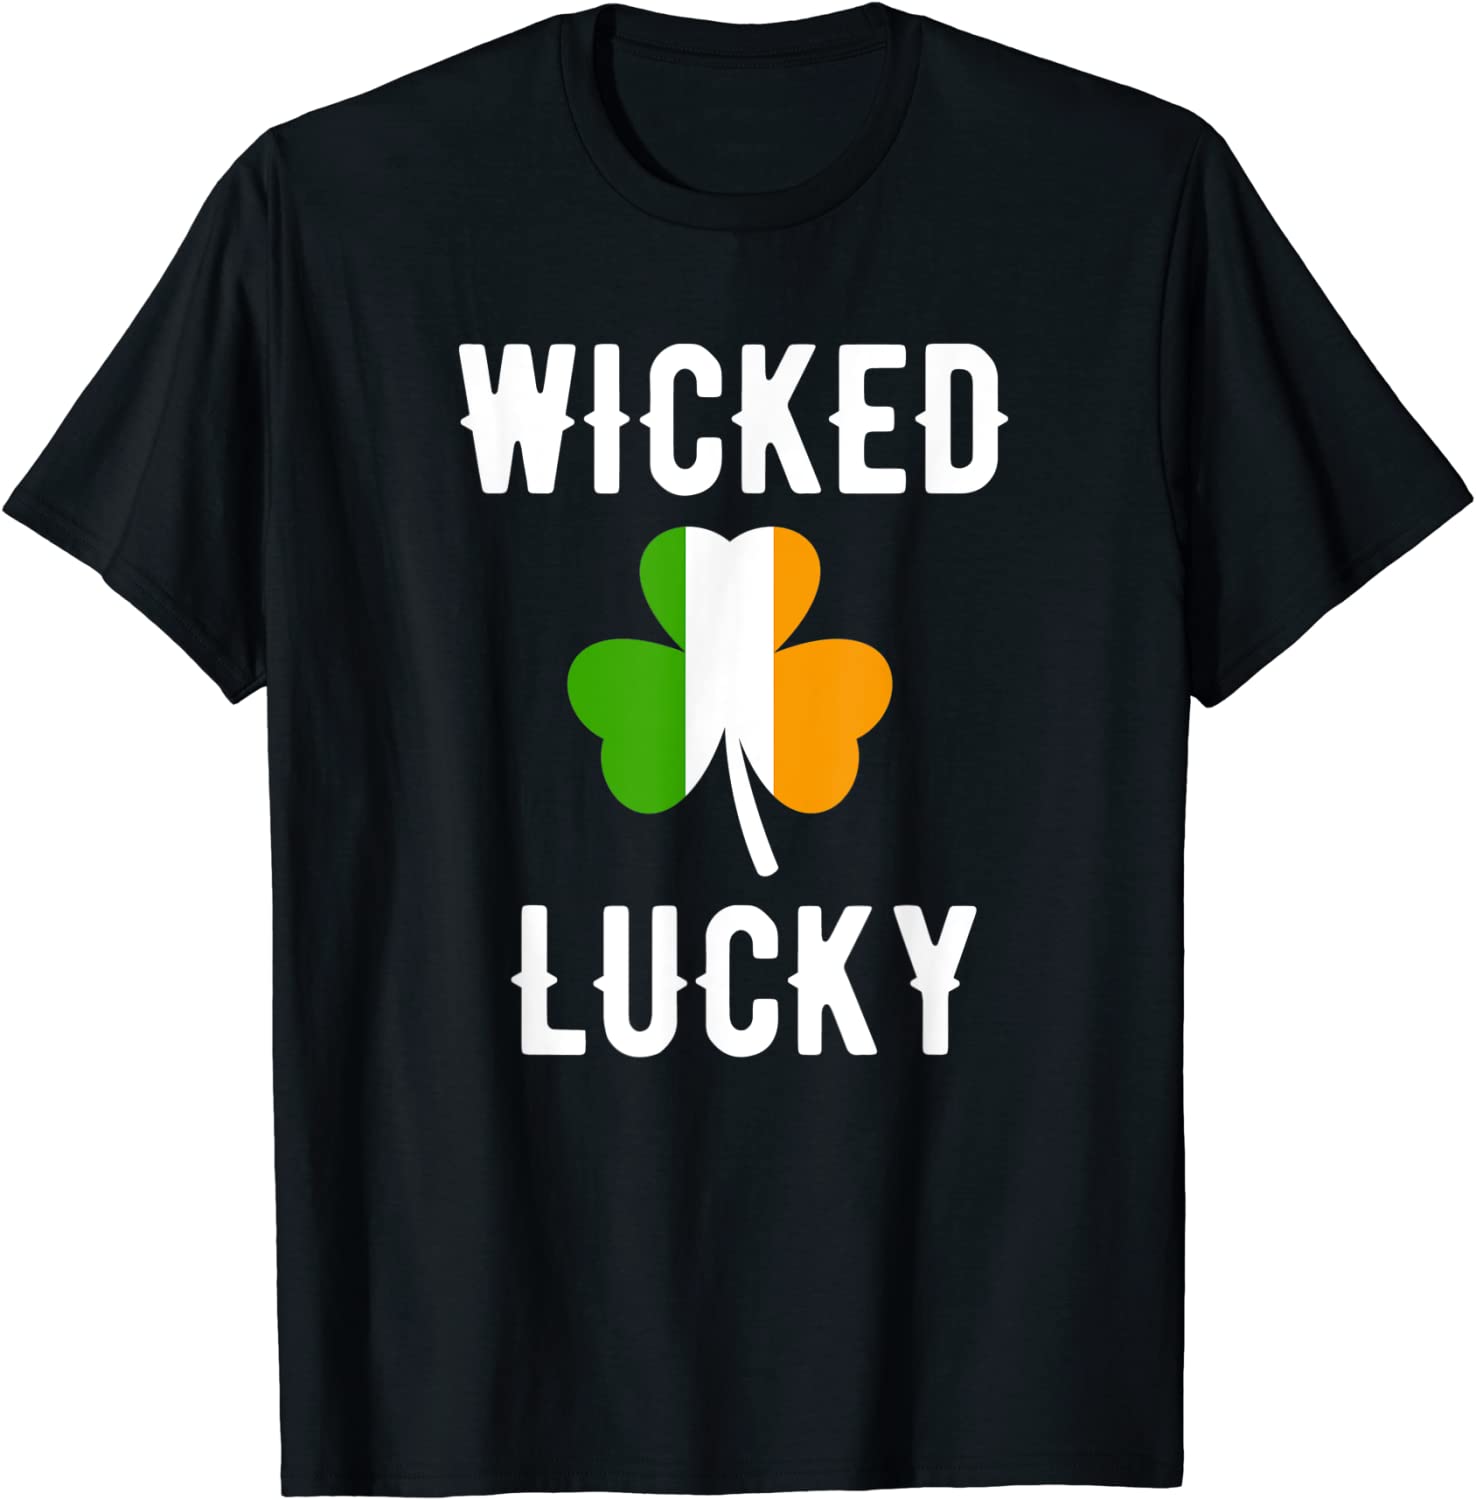 wicked lucky t-shirt